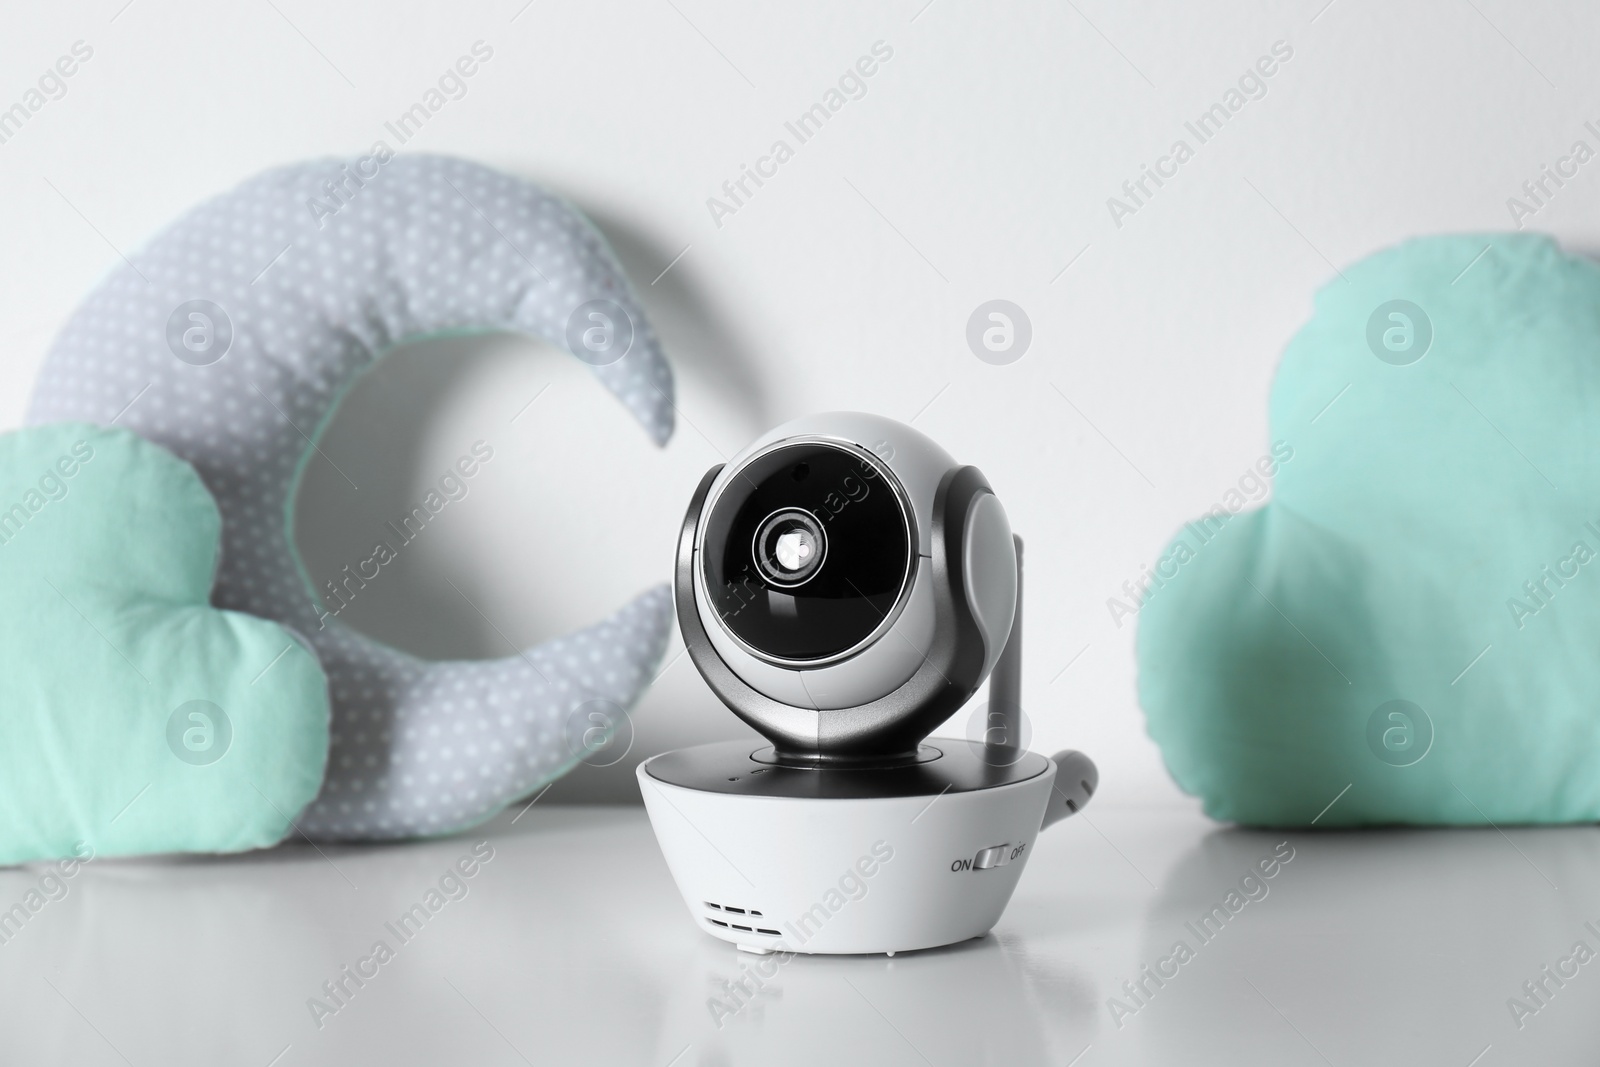 Photo of Modern CCTV security camera and decorative nursery pillows on table